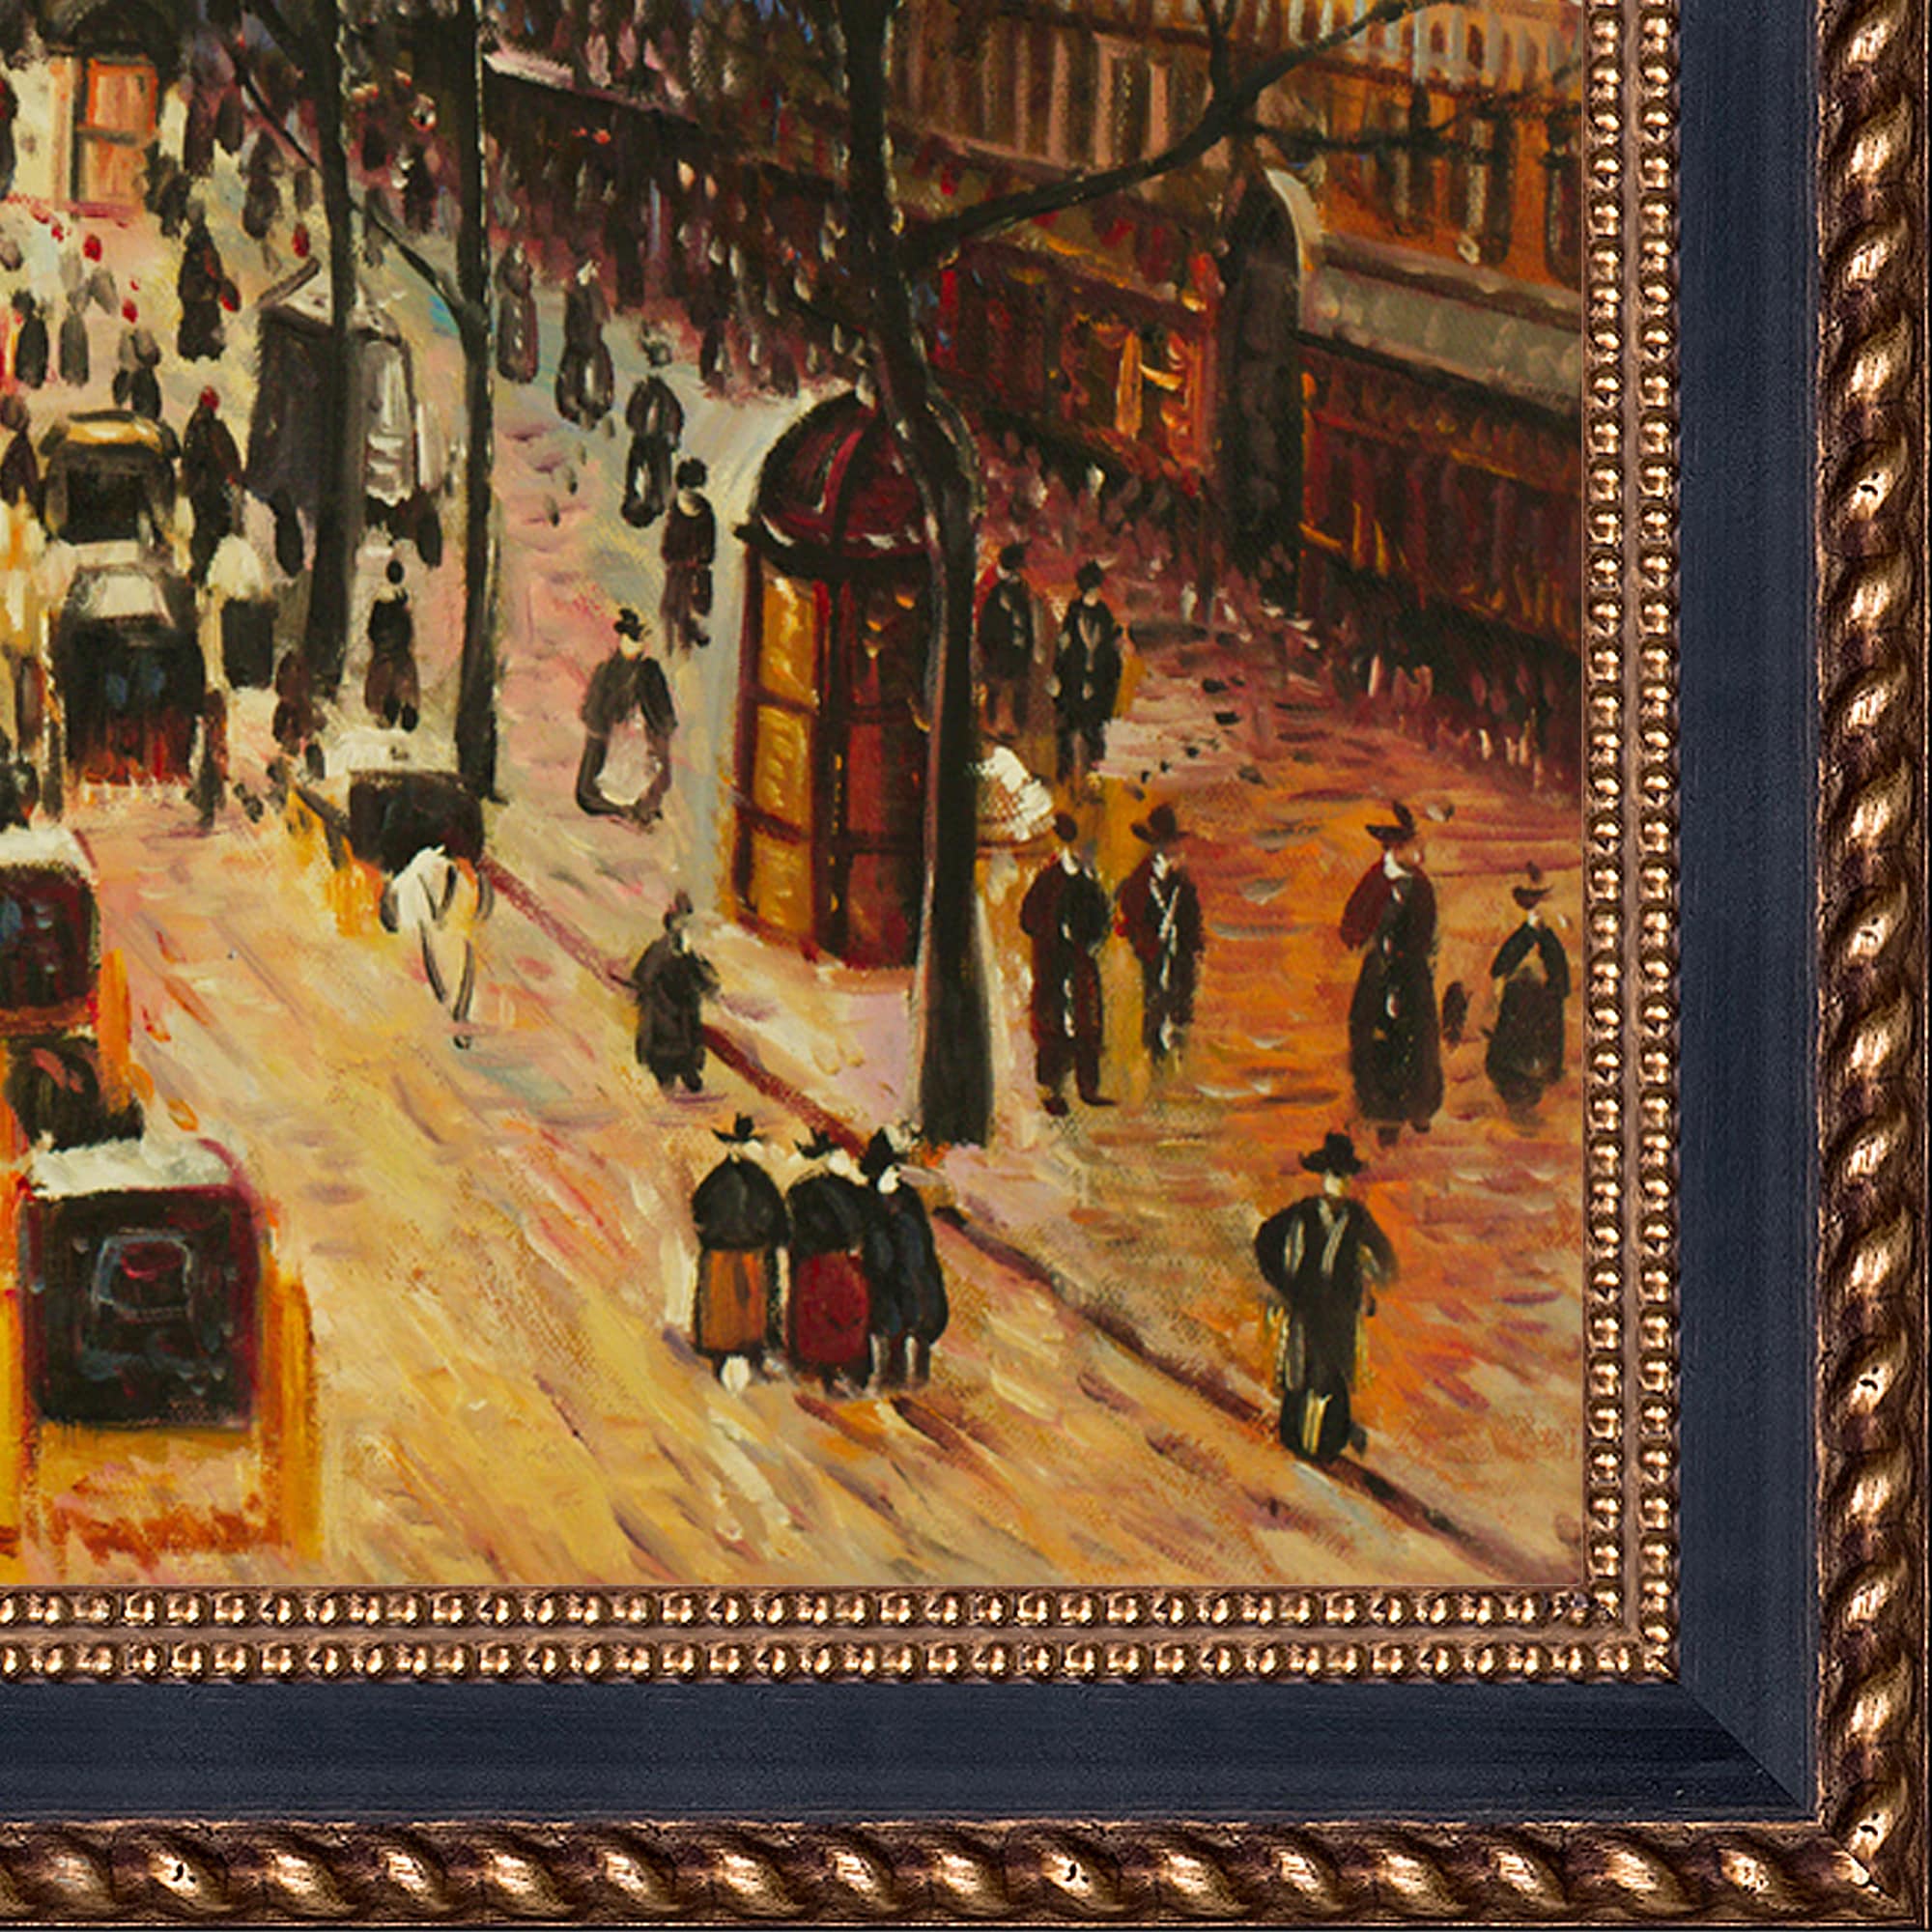 La Pastiche Boulevard Montmartre 28.75 x 24.75 Multi-Color Spring with Verona Black and Gold Braid Framed Oil Painting 